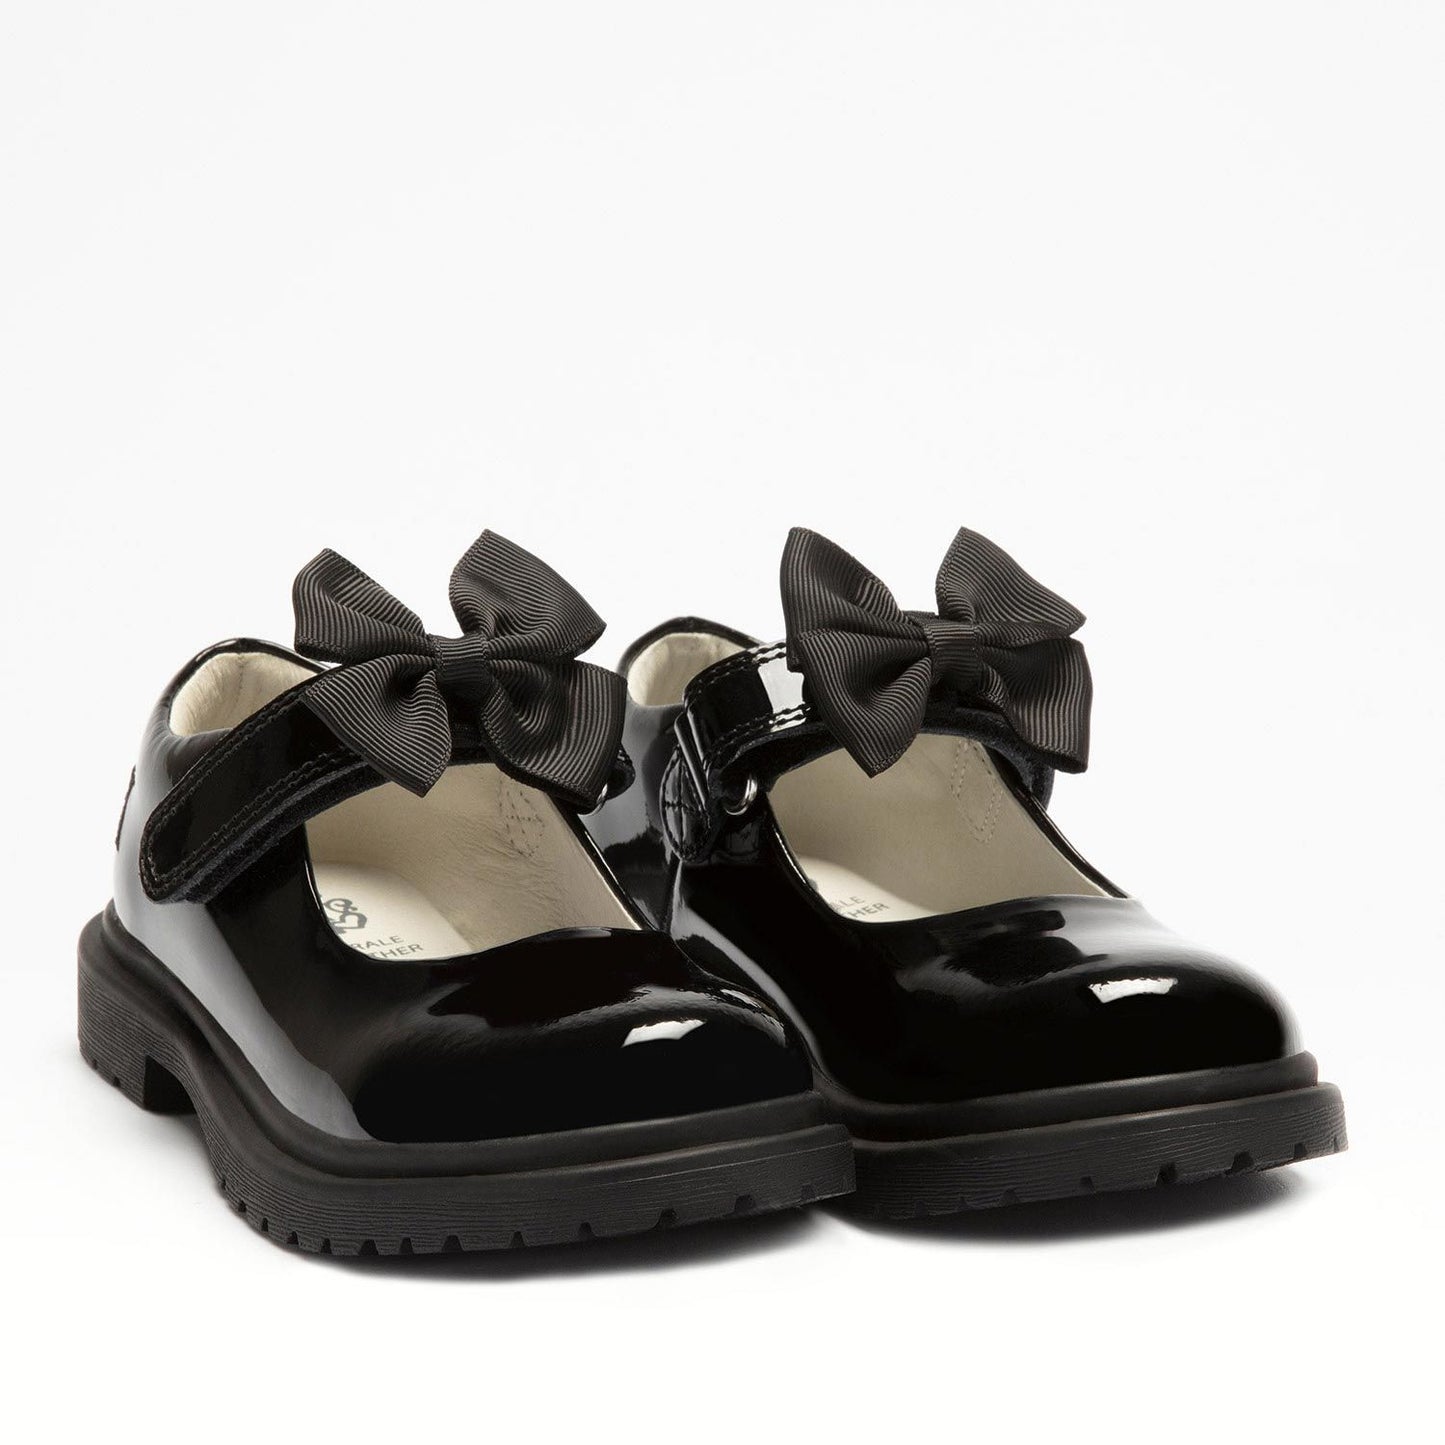 A pair of girls chunky Mary Jane school shoes by Lelli Kelly, style LK8661 Maisie, in black patent leather with velcro fastening and detachable black fabric bow. Angled view.